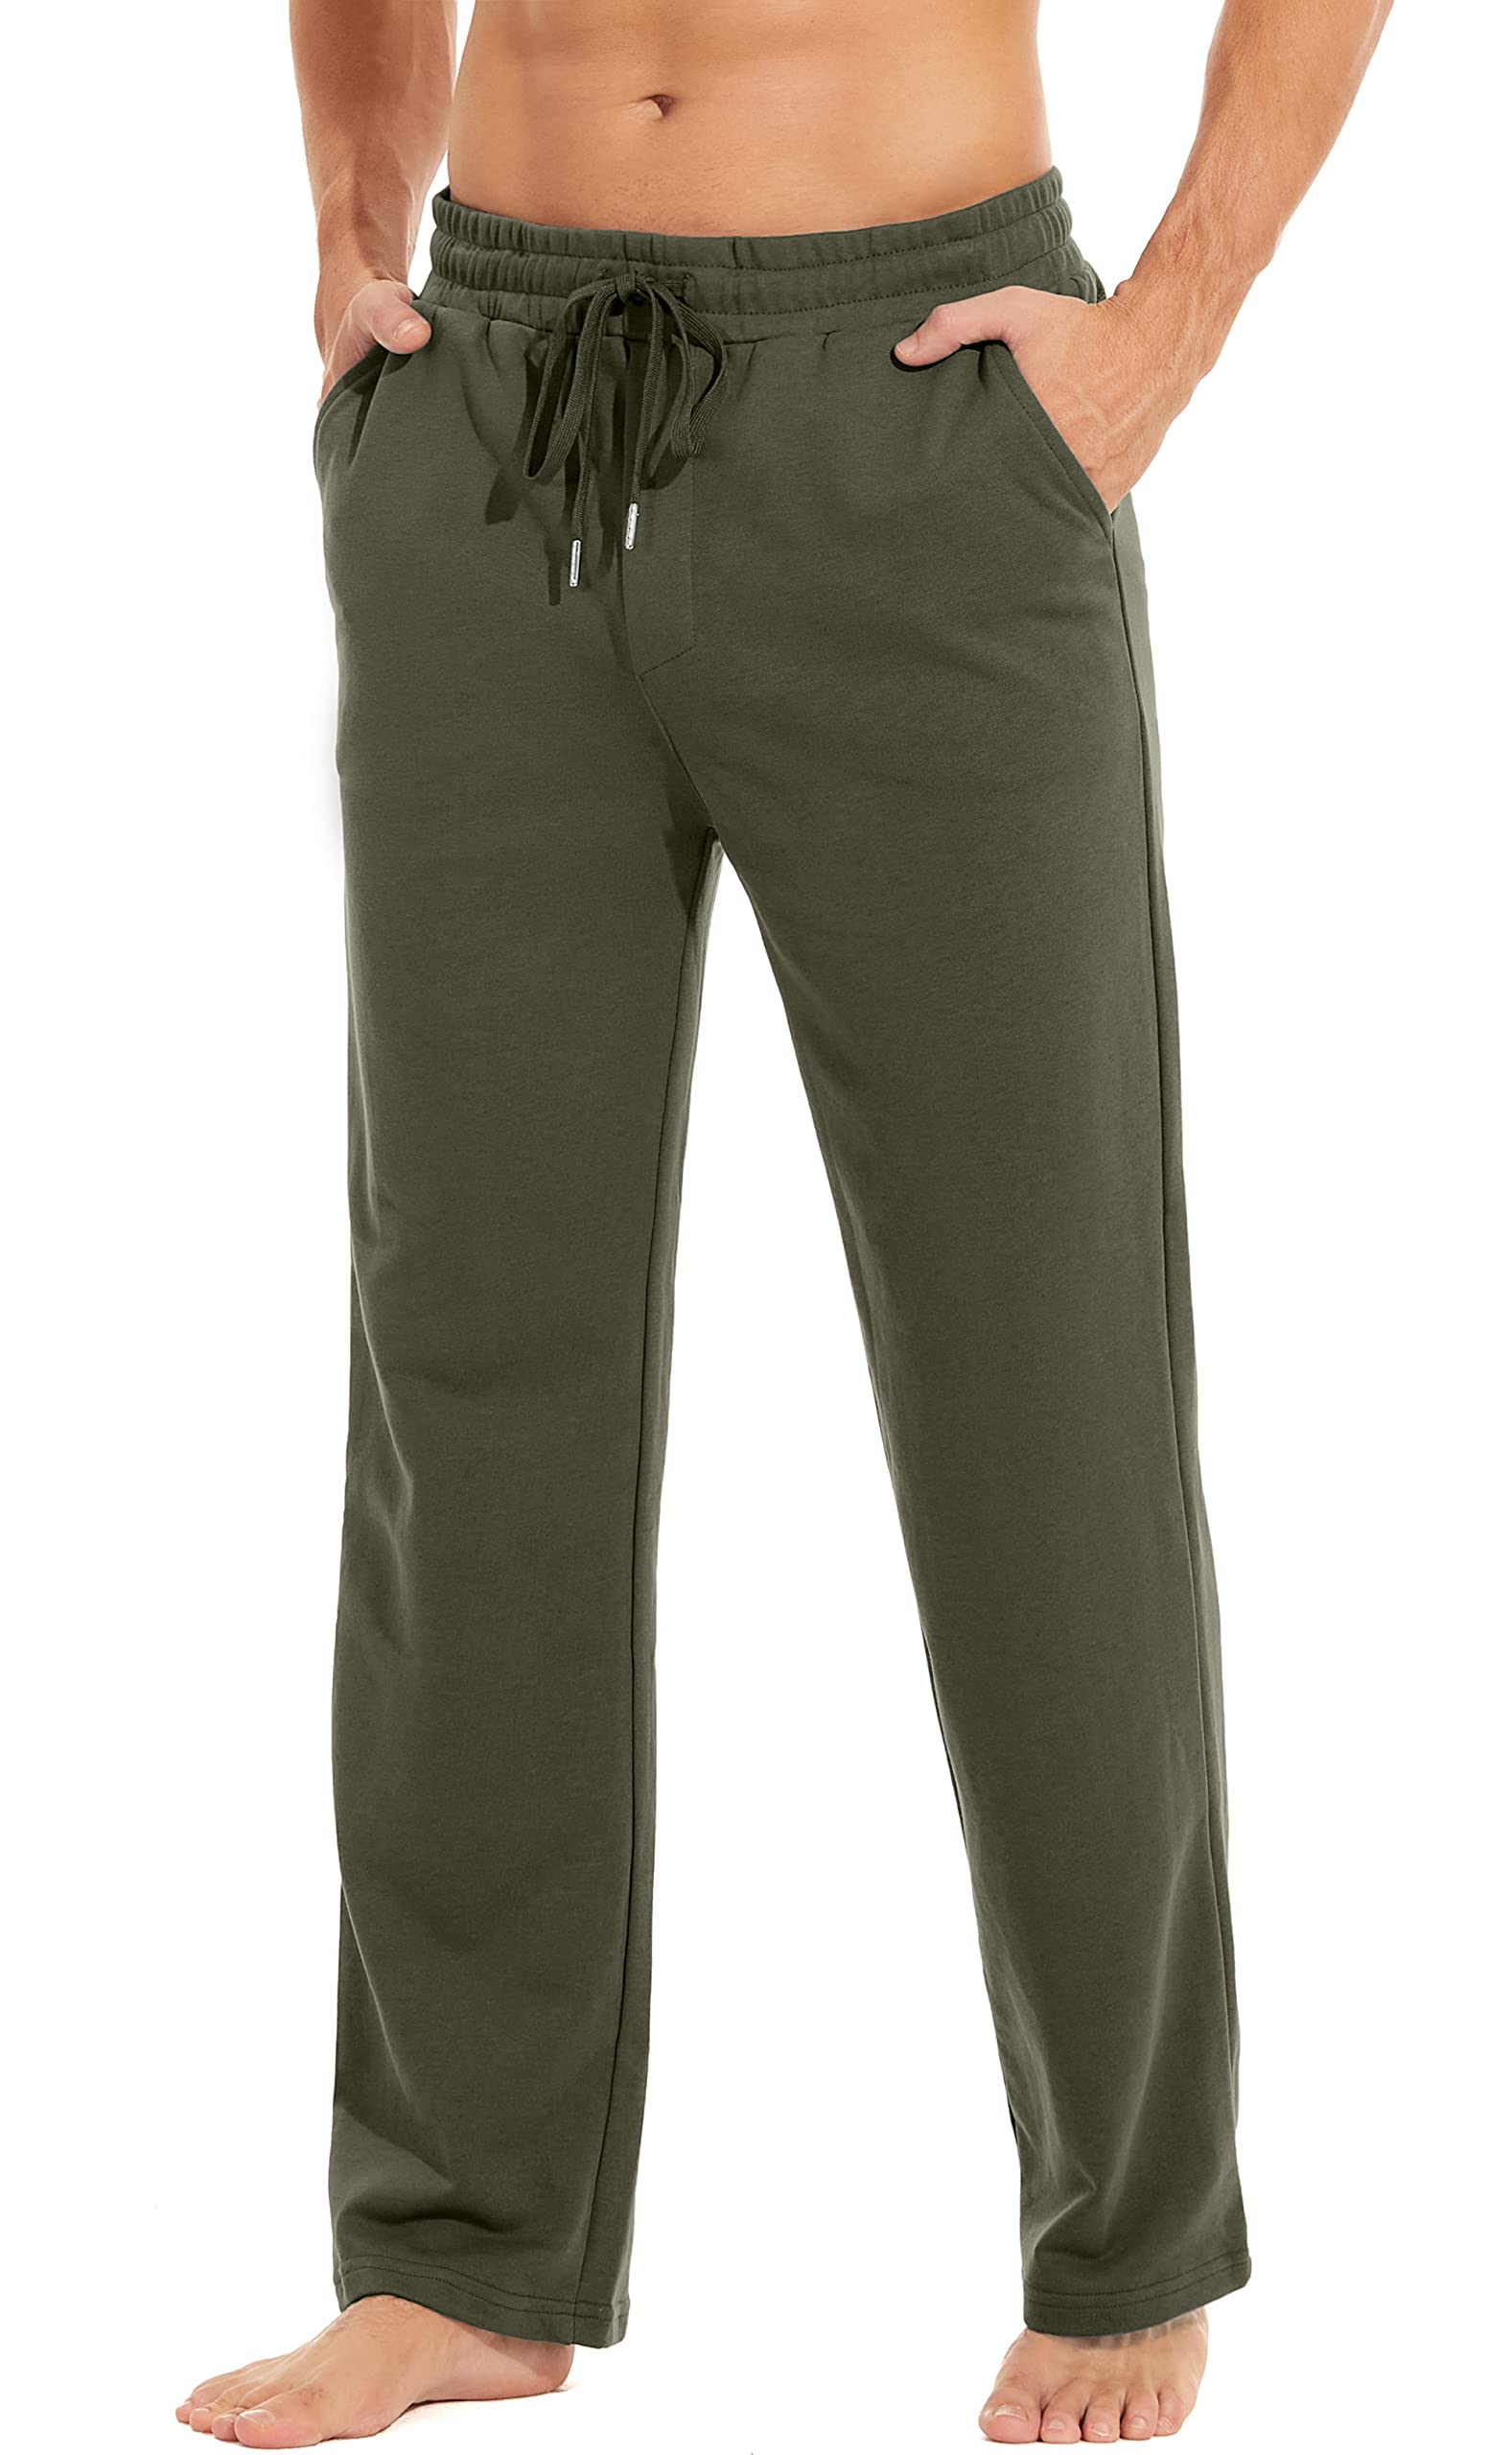 Men's Tracksuit Bottoms and Workout Pants